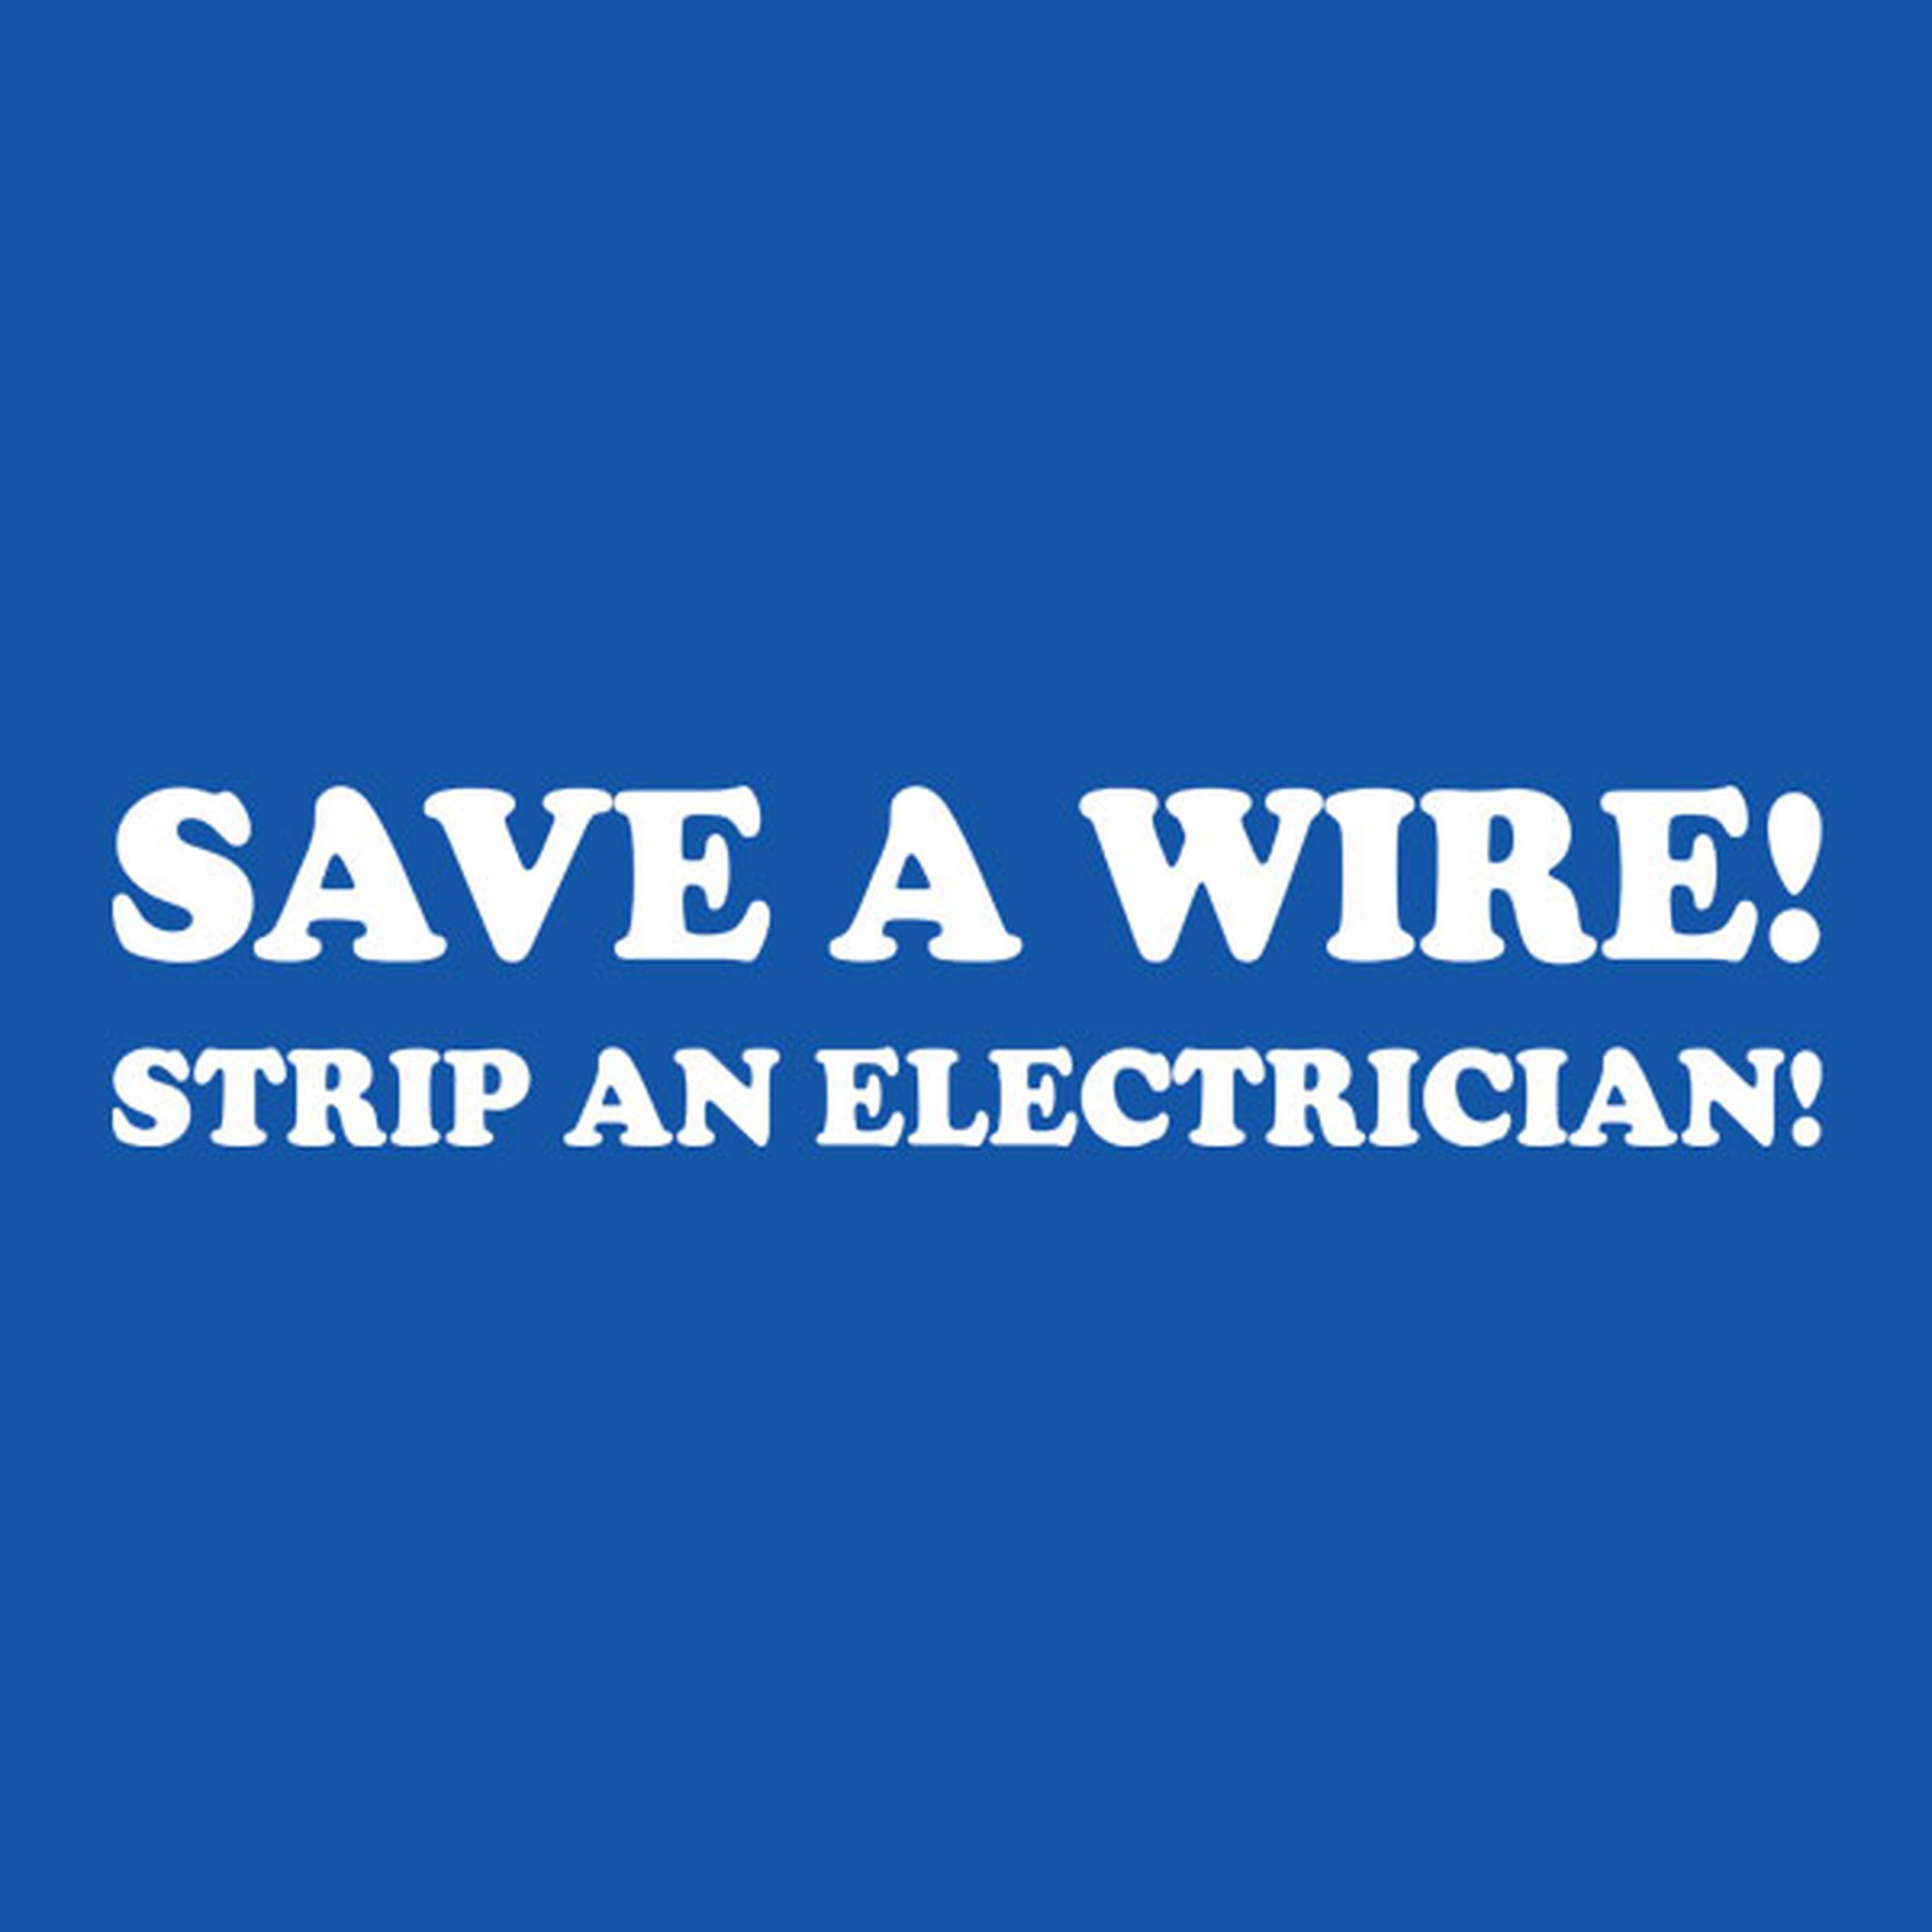 Save a wire, strip an electrician - T-shirt